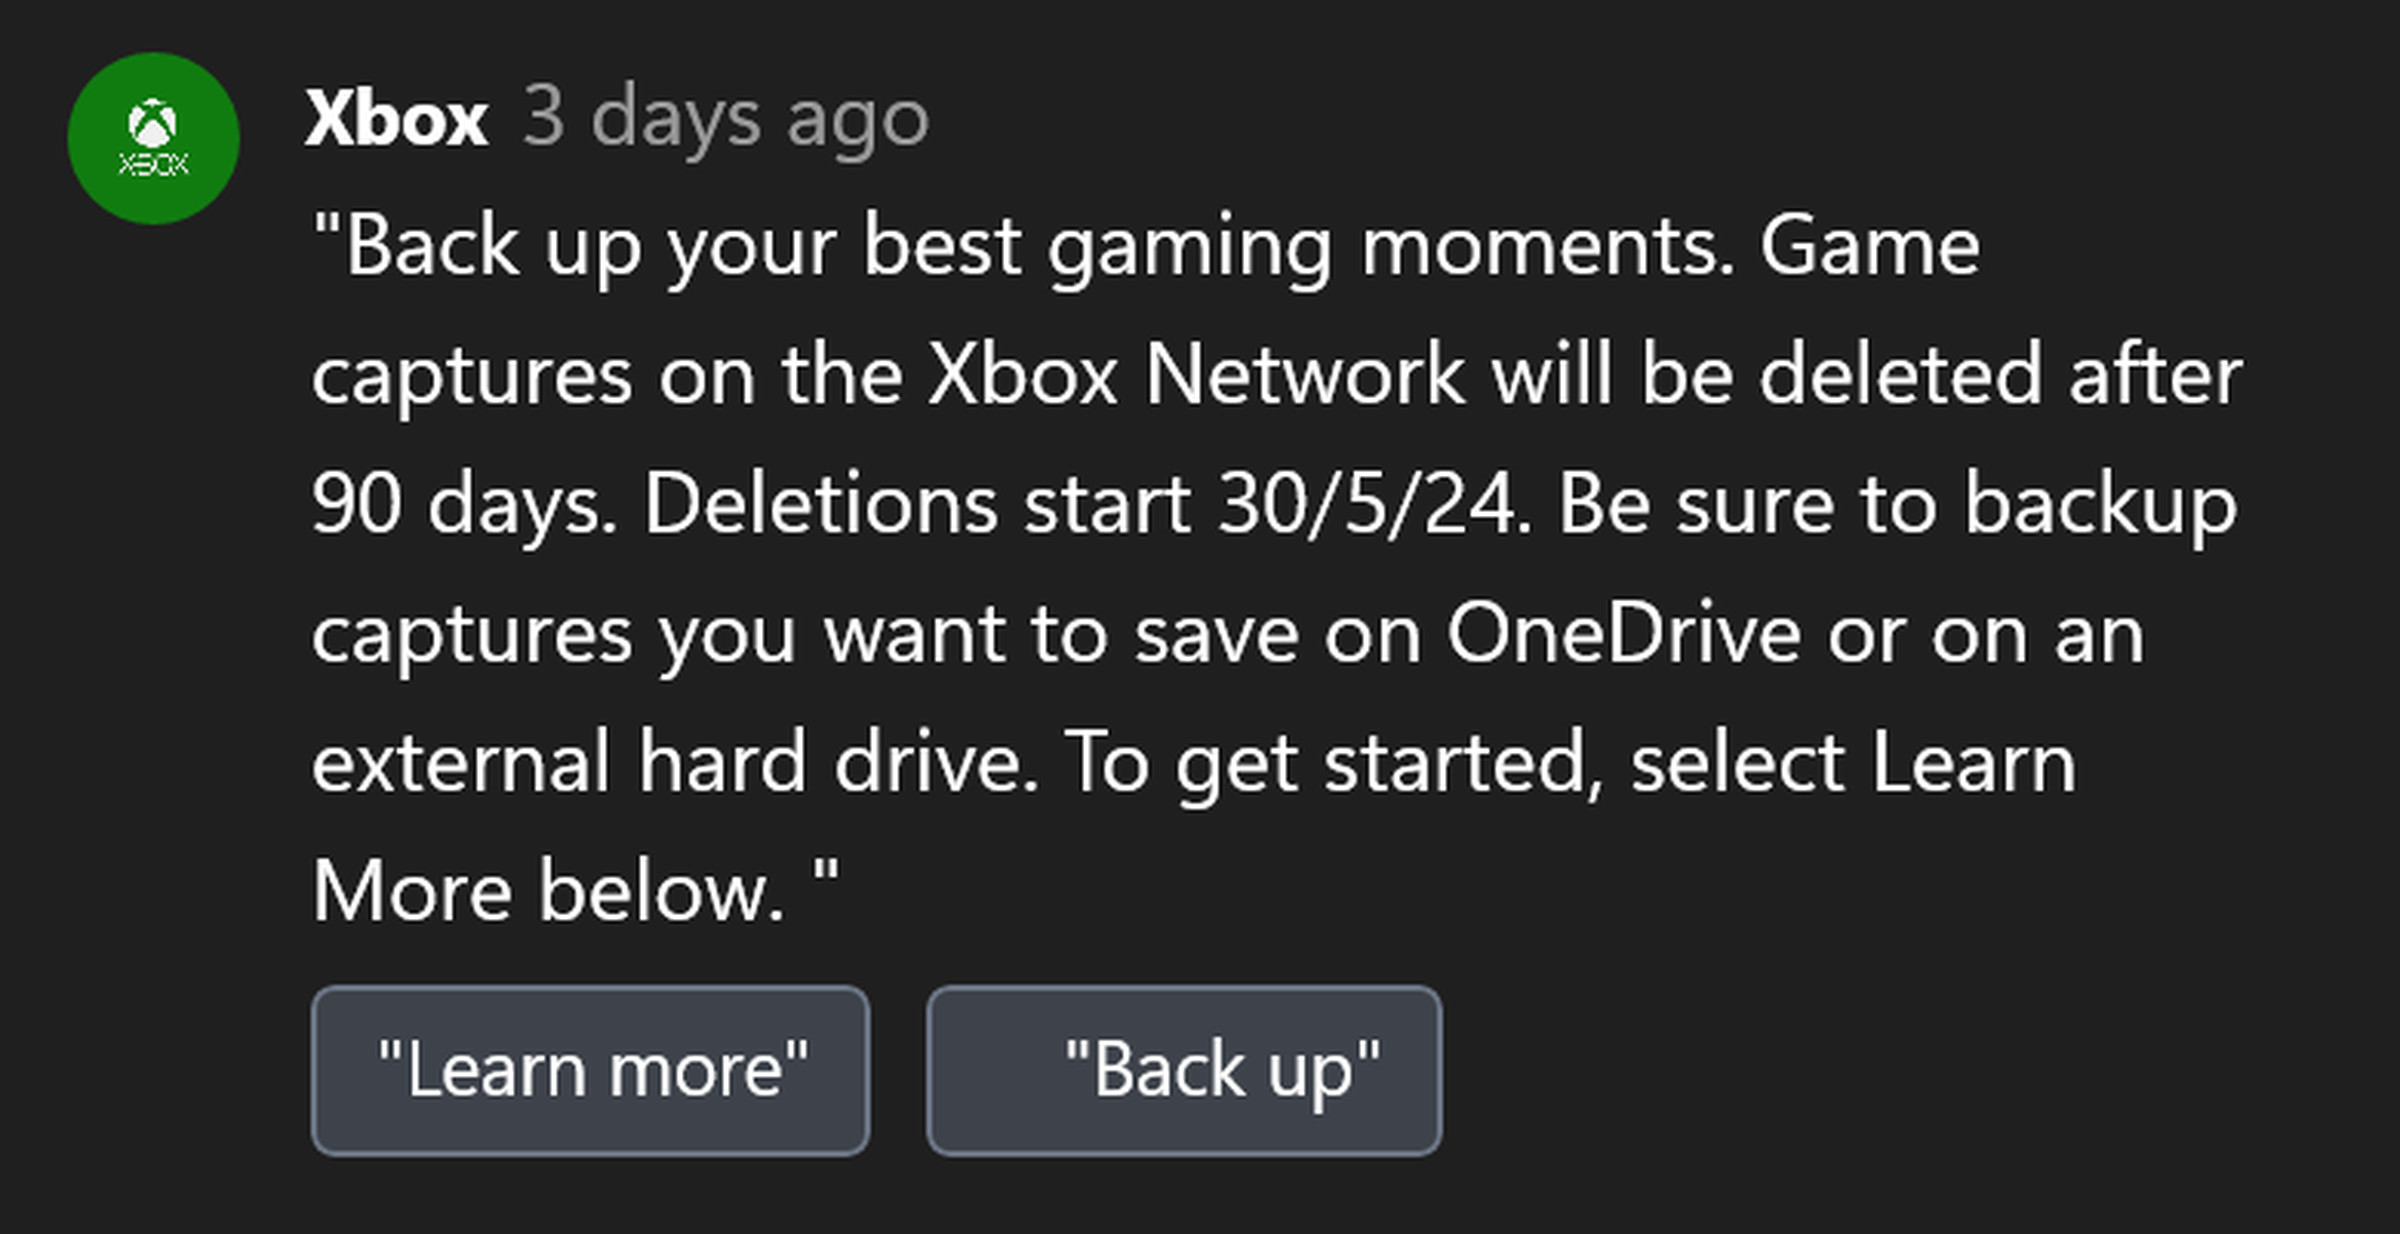 A message from Xbox.